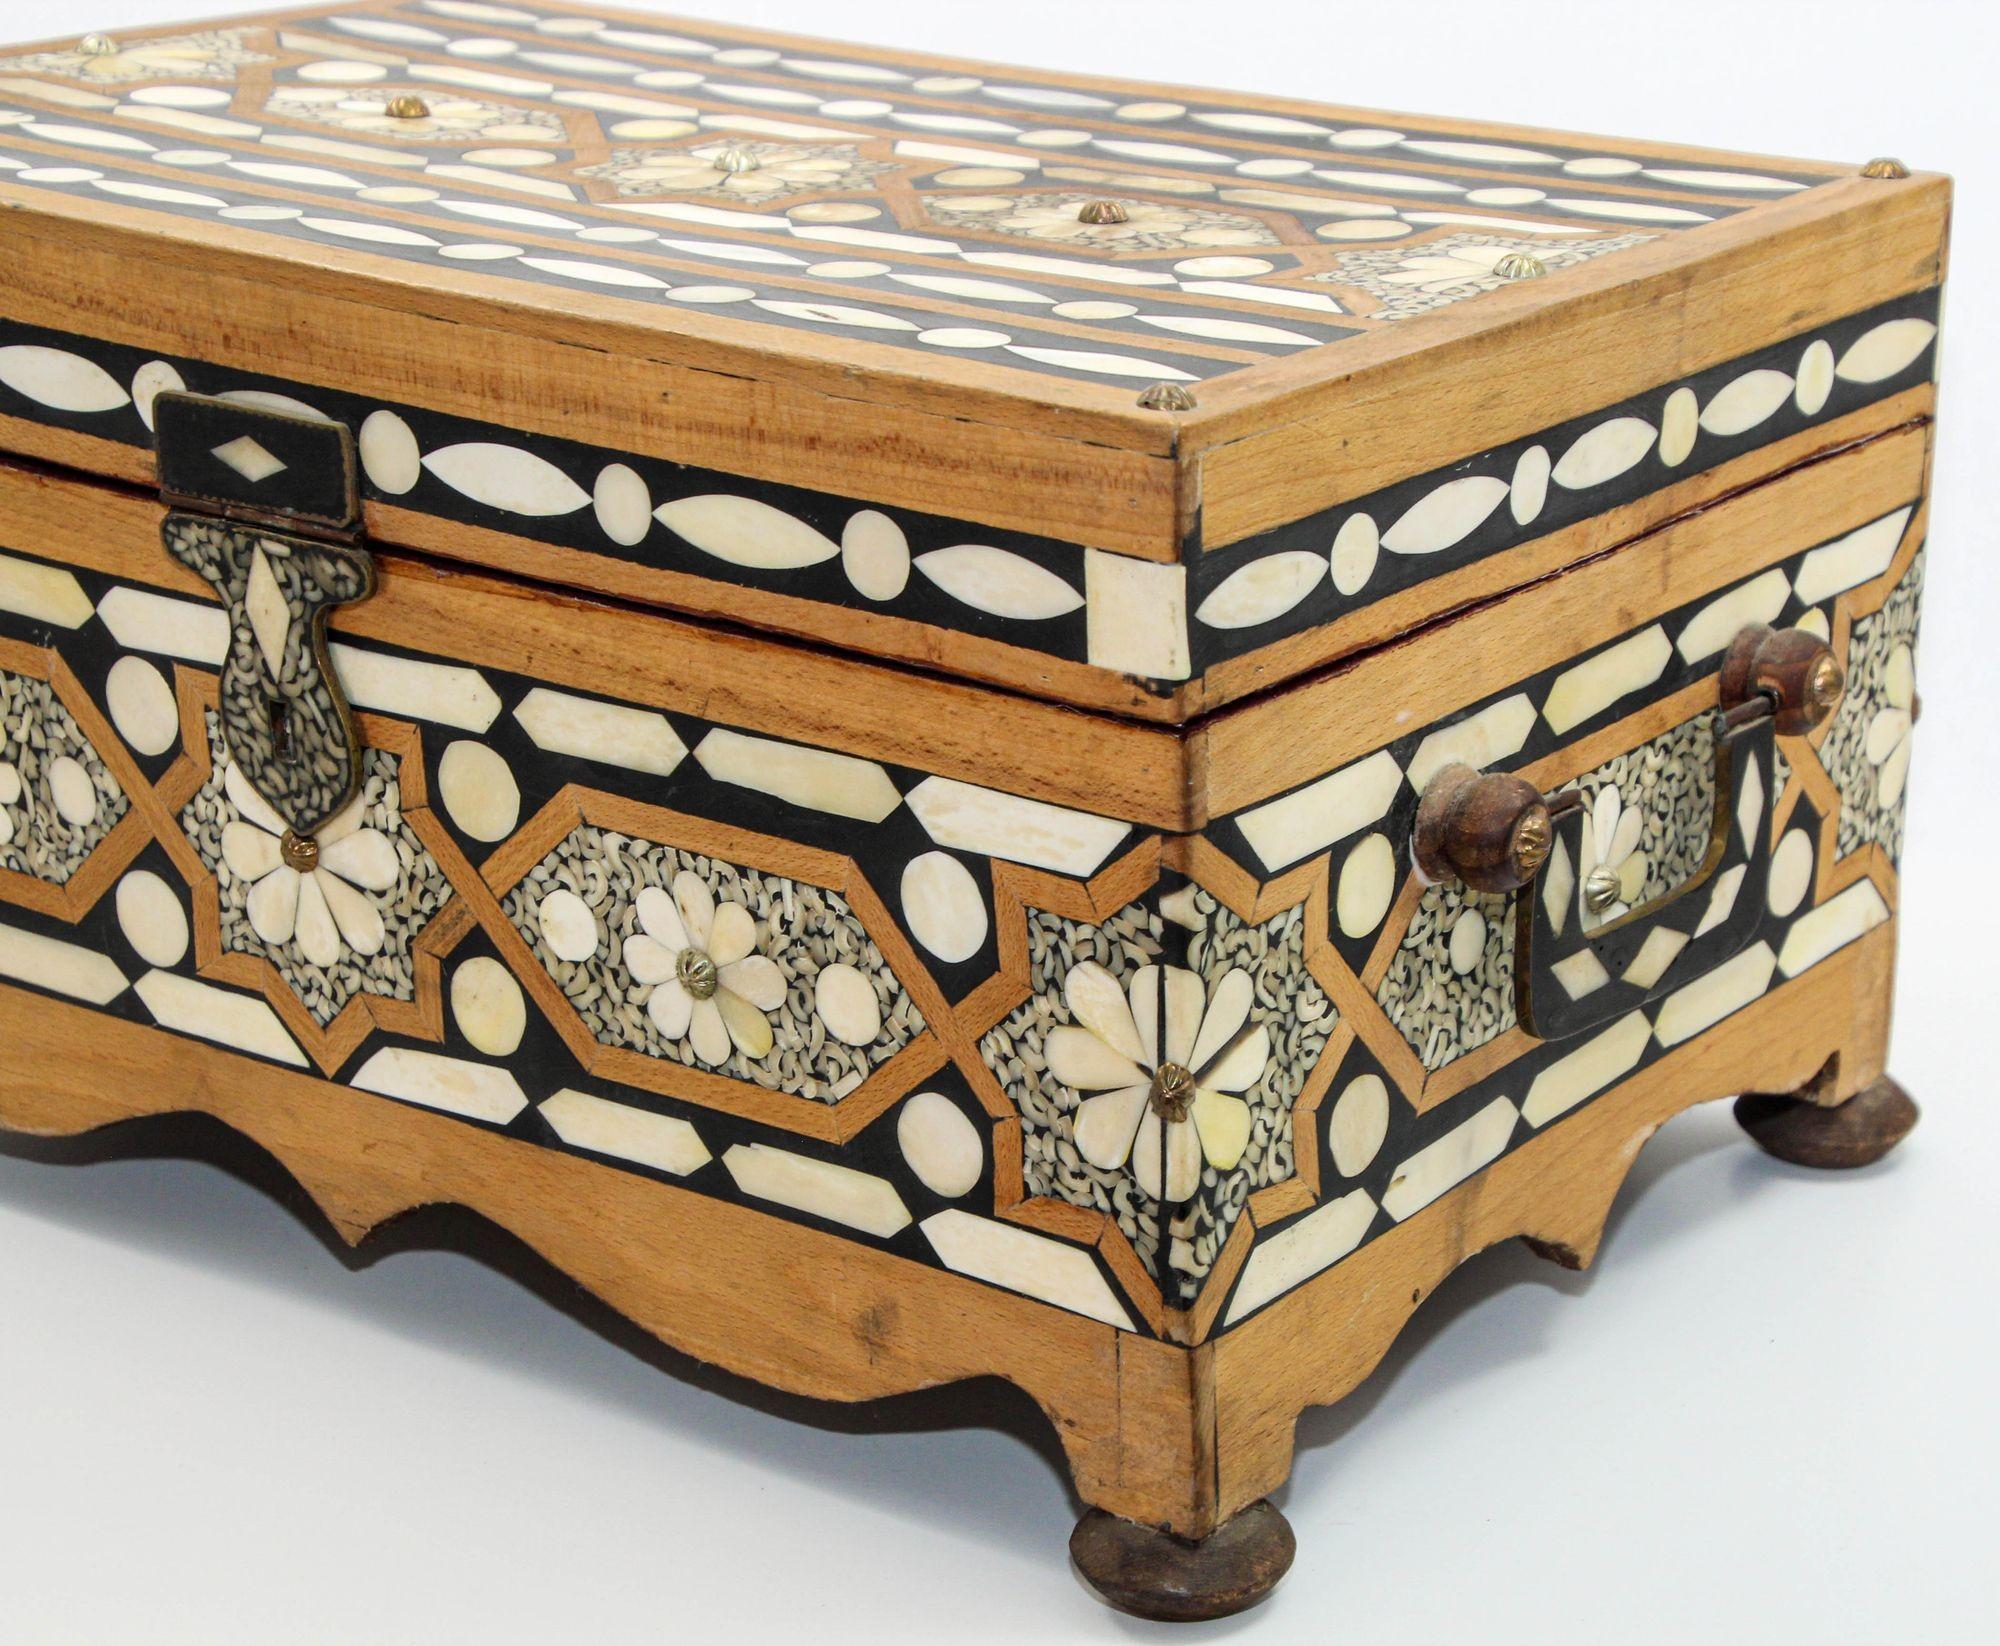 Moroccan Dowry Box Inlaid with White Camel Bone Rectangular Carved Wood Trunk For Sale 6